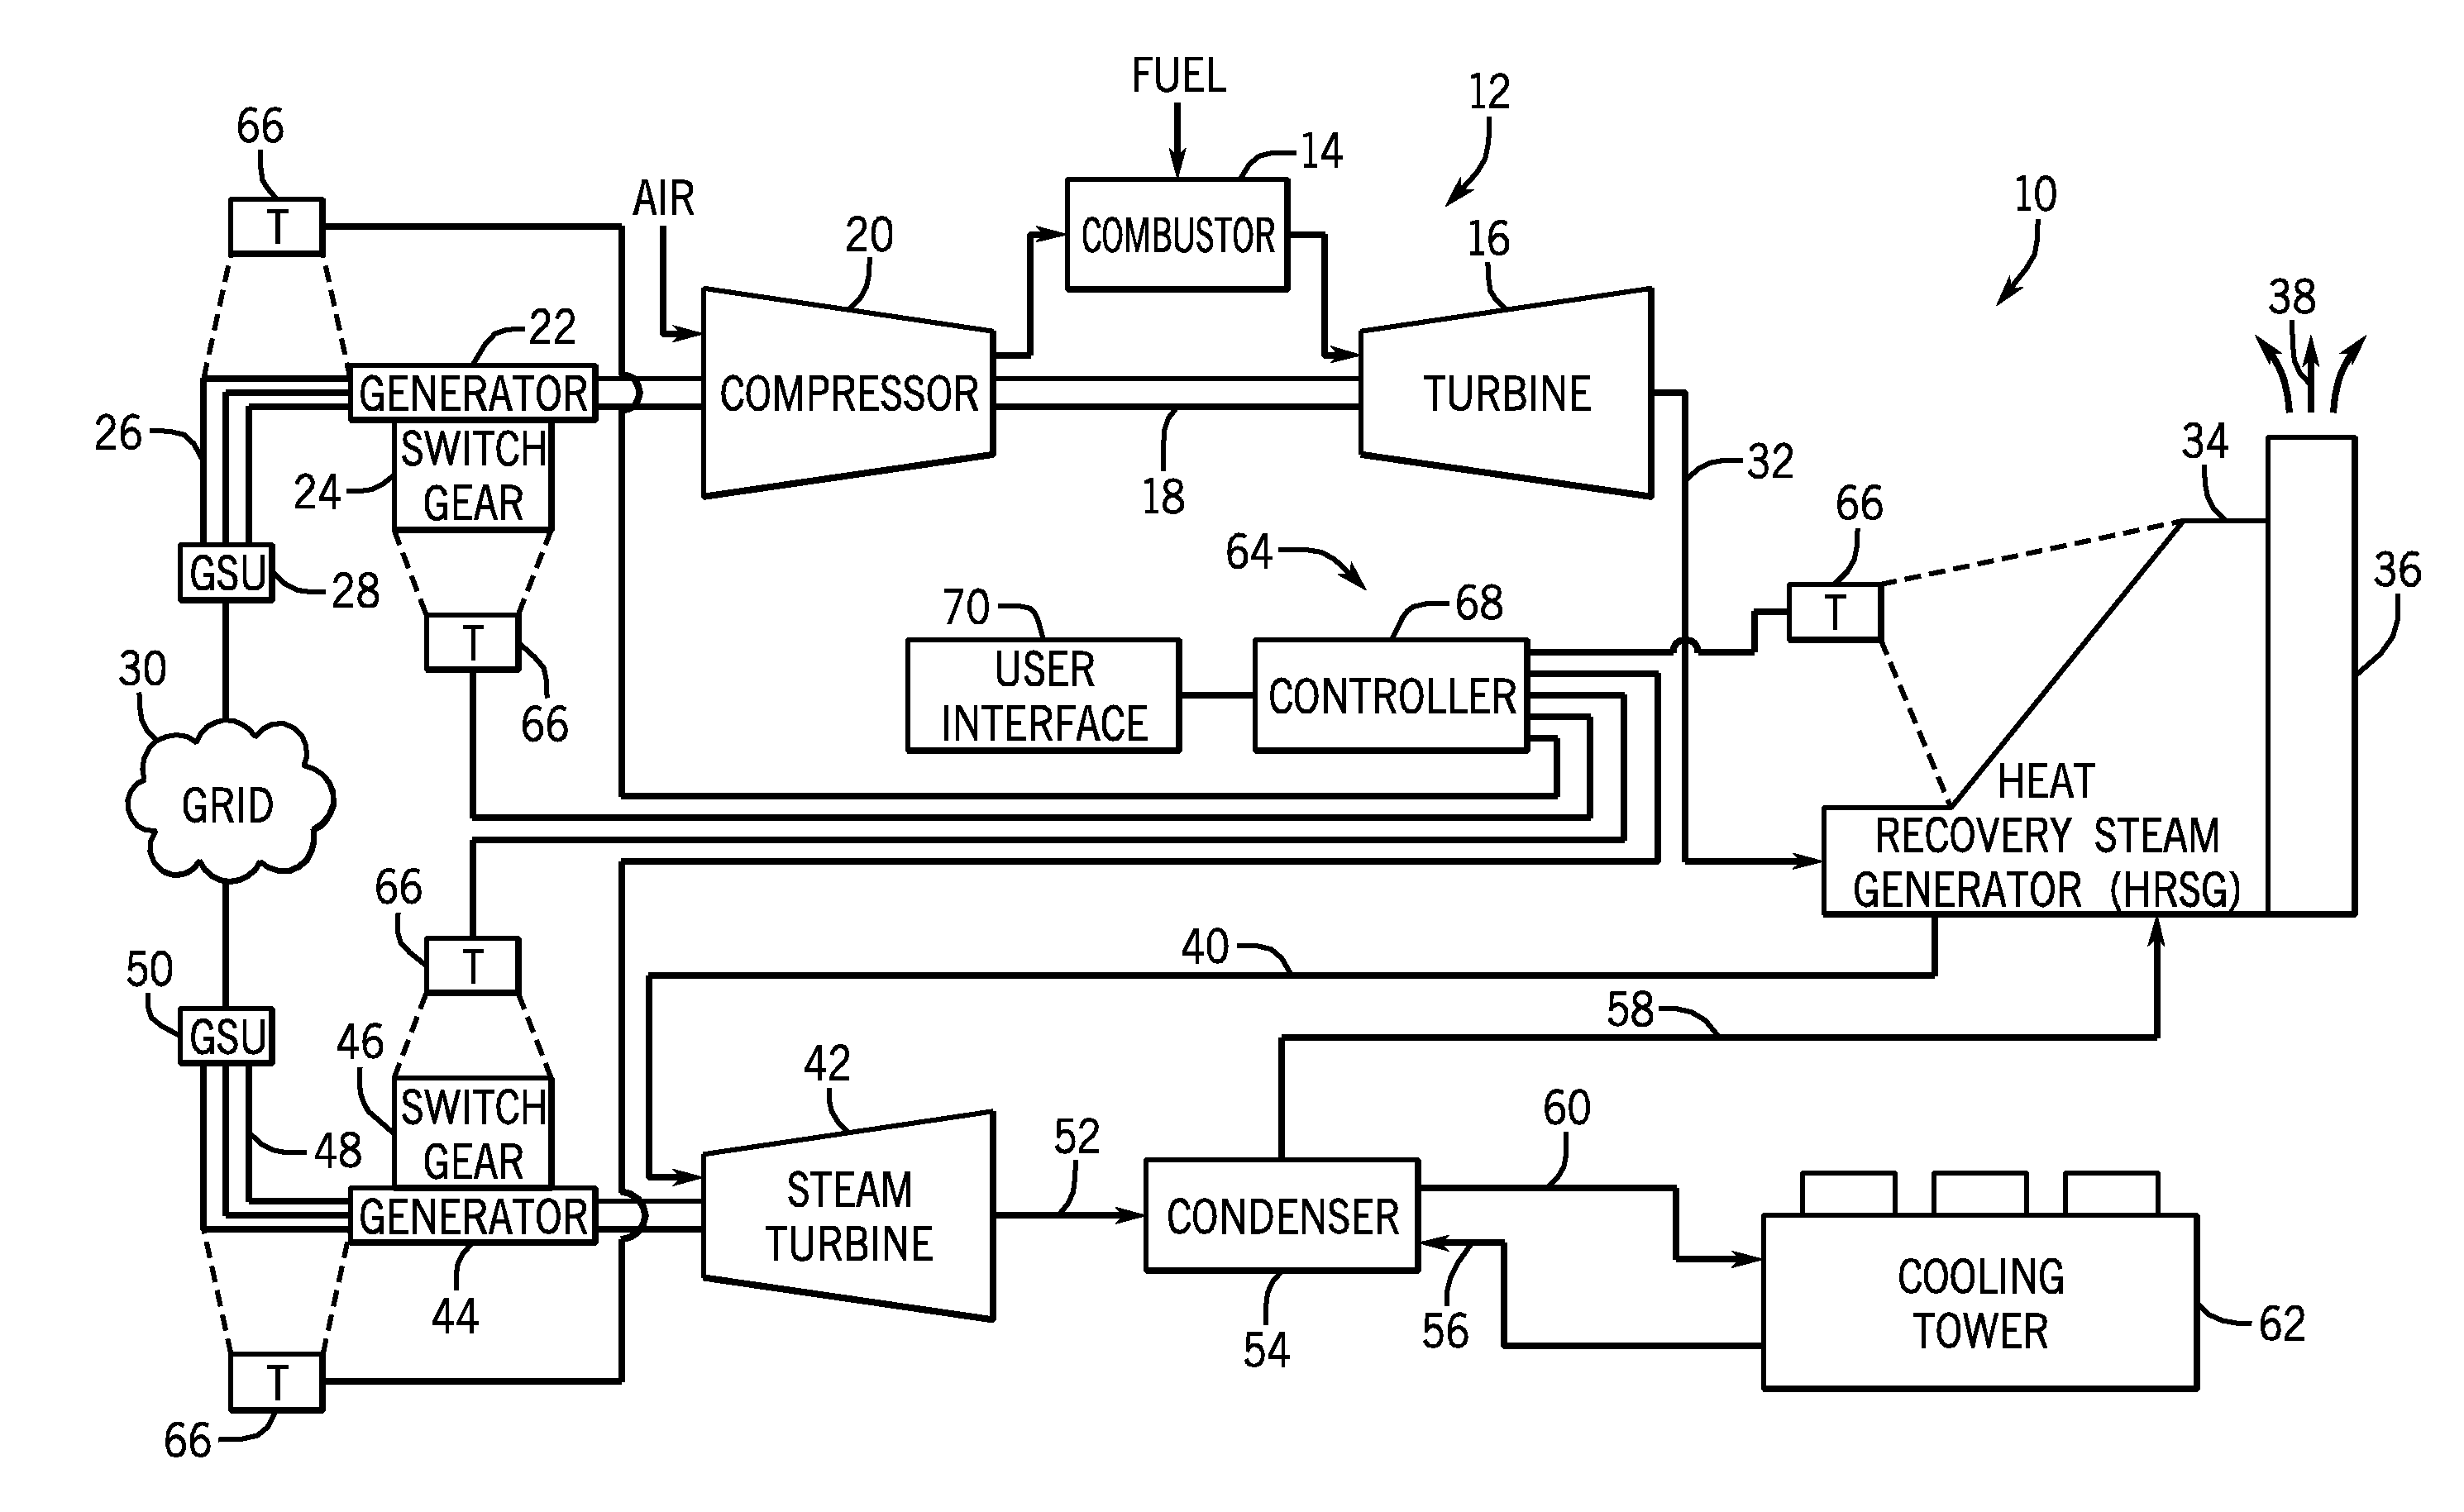 Thermal measurement system for fault detection within a power generation system